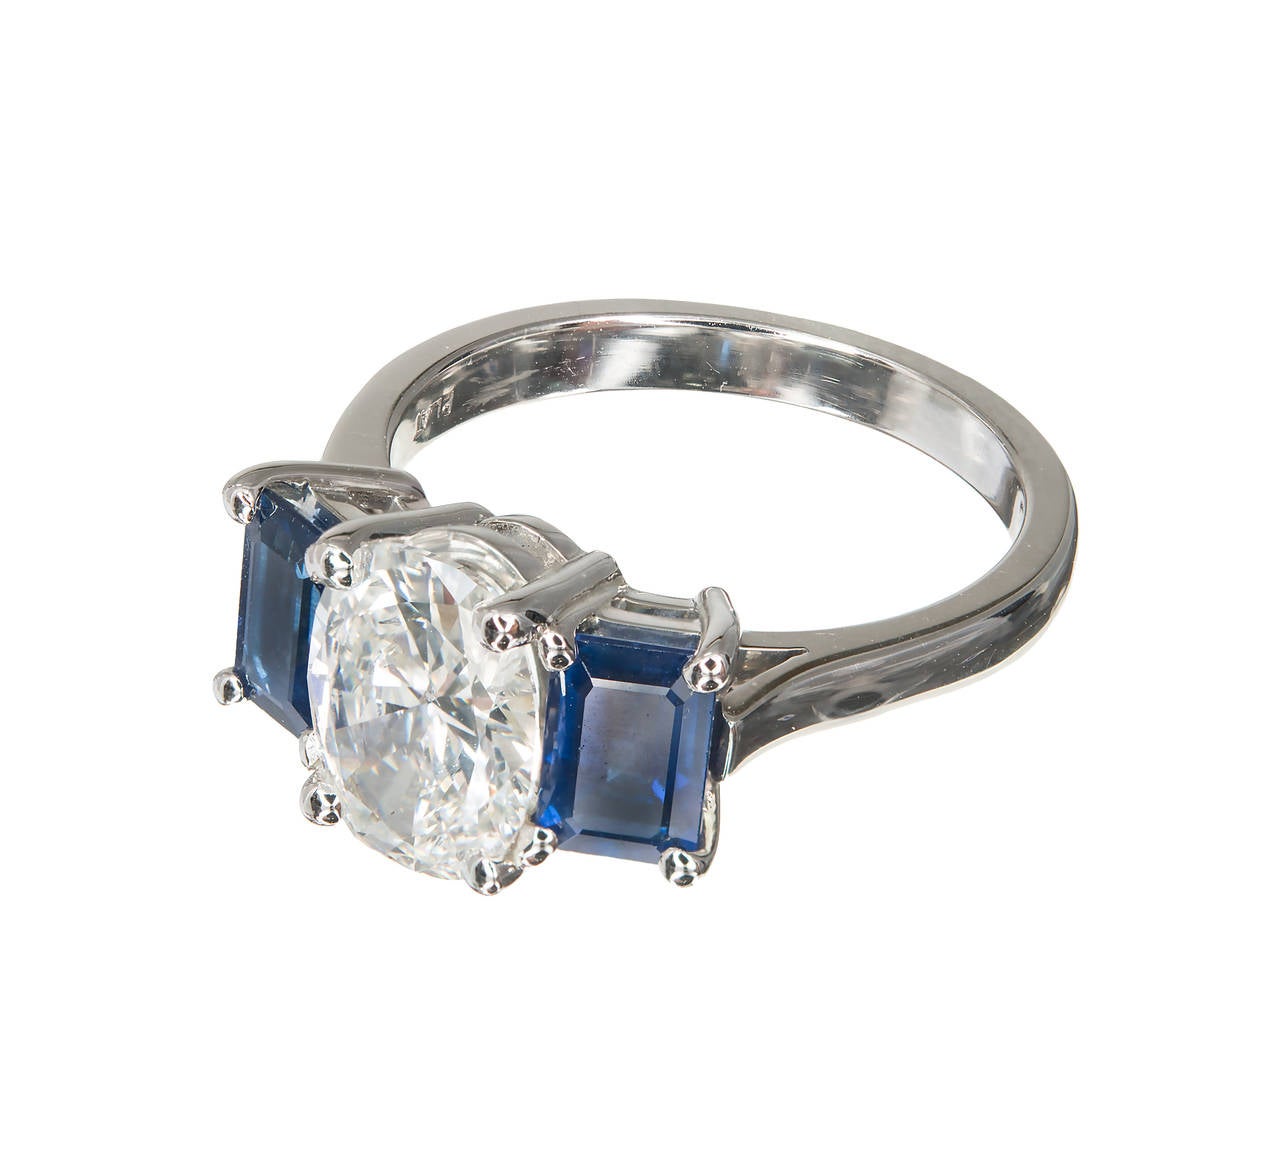 Beautiful oval diamond, extra bright and sparkly. Very white and eye clean. Matched with 2 estate Sapphires fine deep blue Emerald cut and simple heat only. Peter Suchy Design ring PSD. Circa 1960.

1 oval diamond, approx. total weight 1.58cts, H,